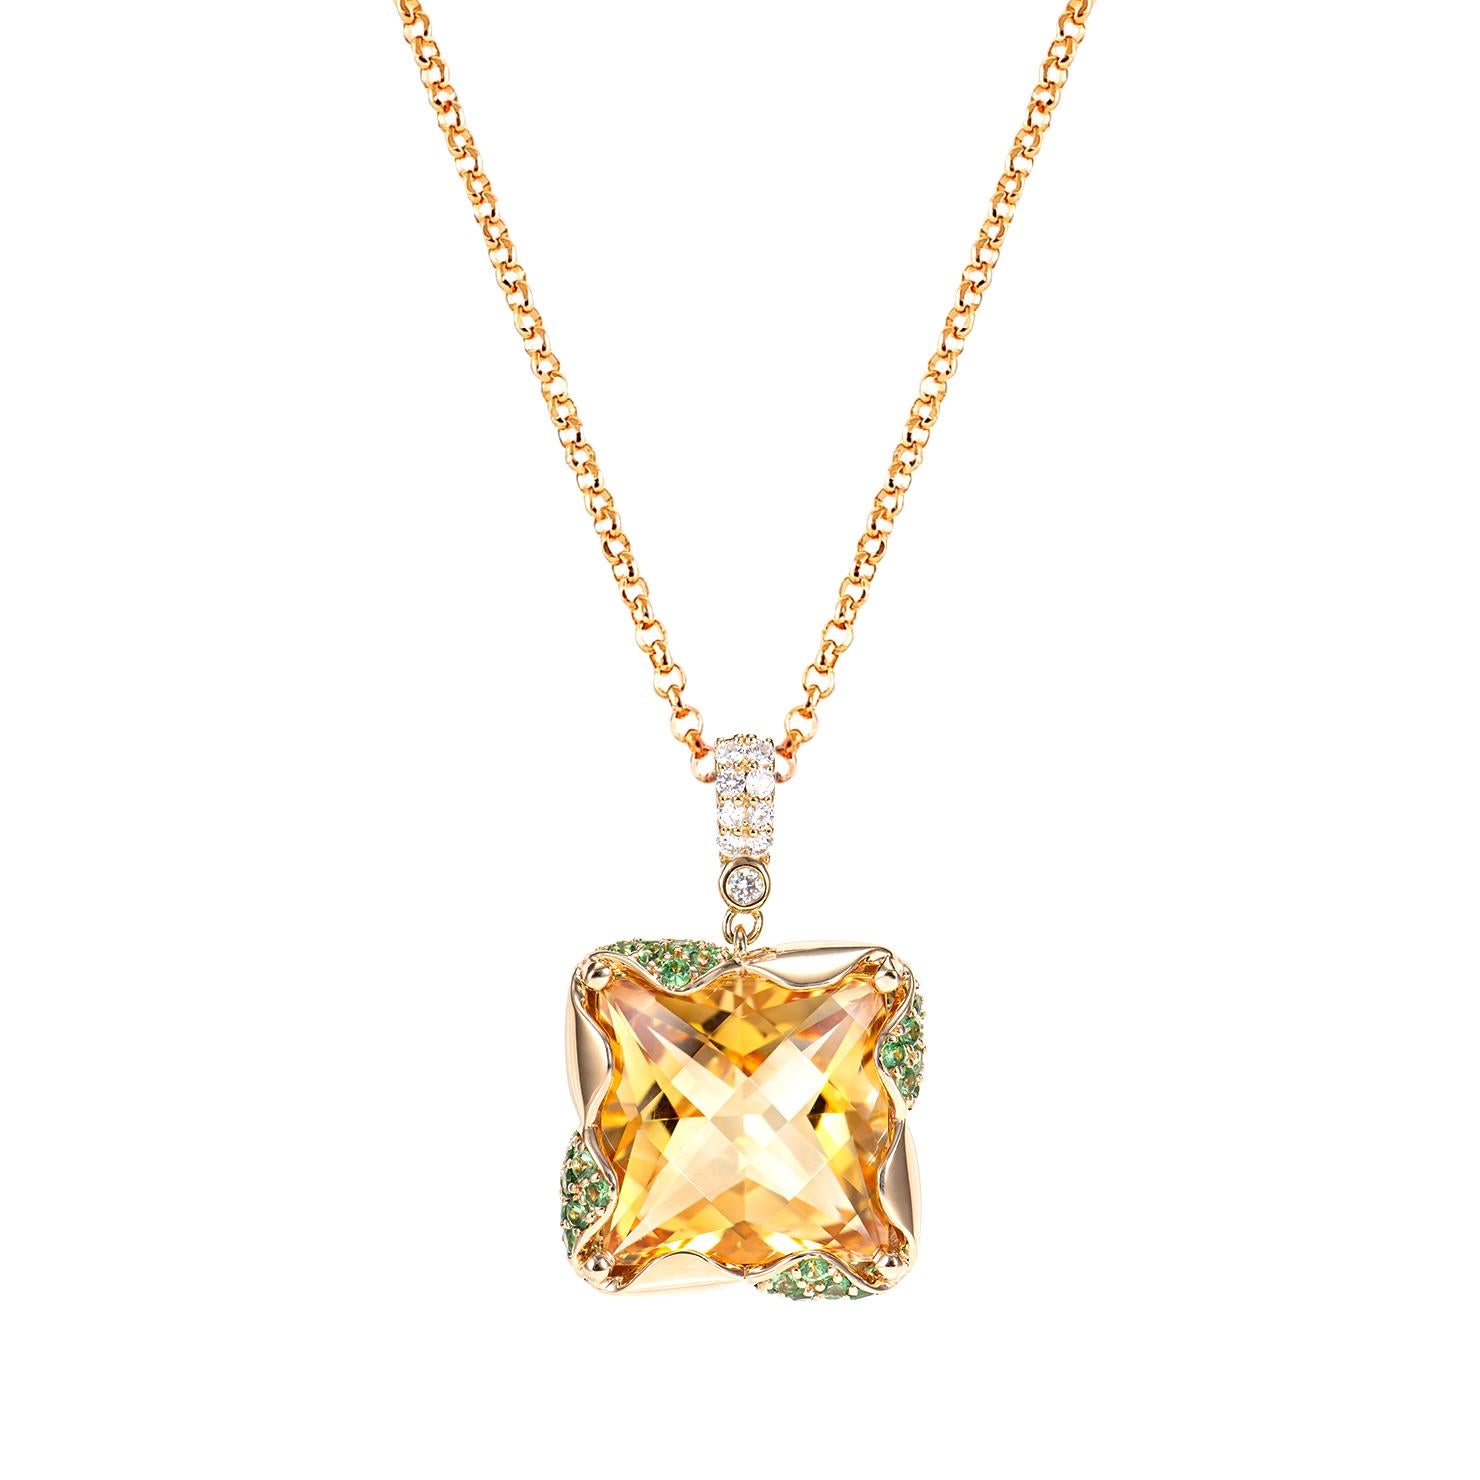 It is fancy Citrine Pendant in a Square shape with yellow hue. The Pendant is elegant and can be worn for many occasions. The Tsavorite around the Pendant add to the beauty and elegance of the Pendant. These beautiful gems make great gifts for